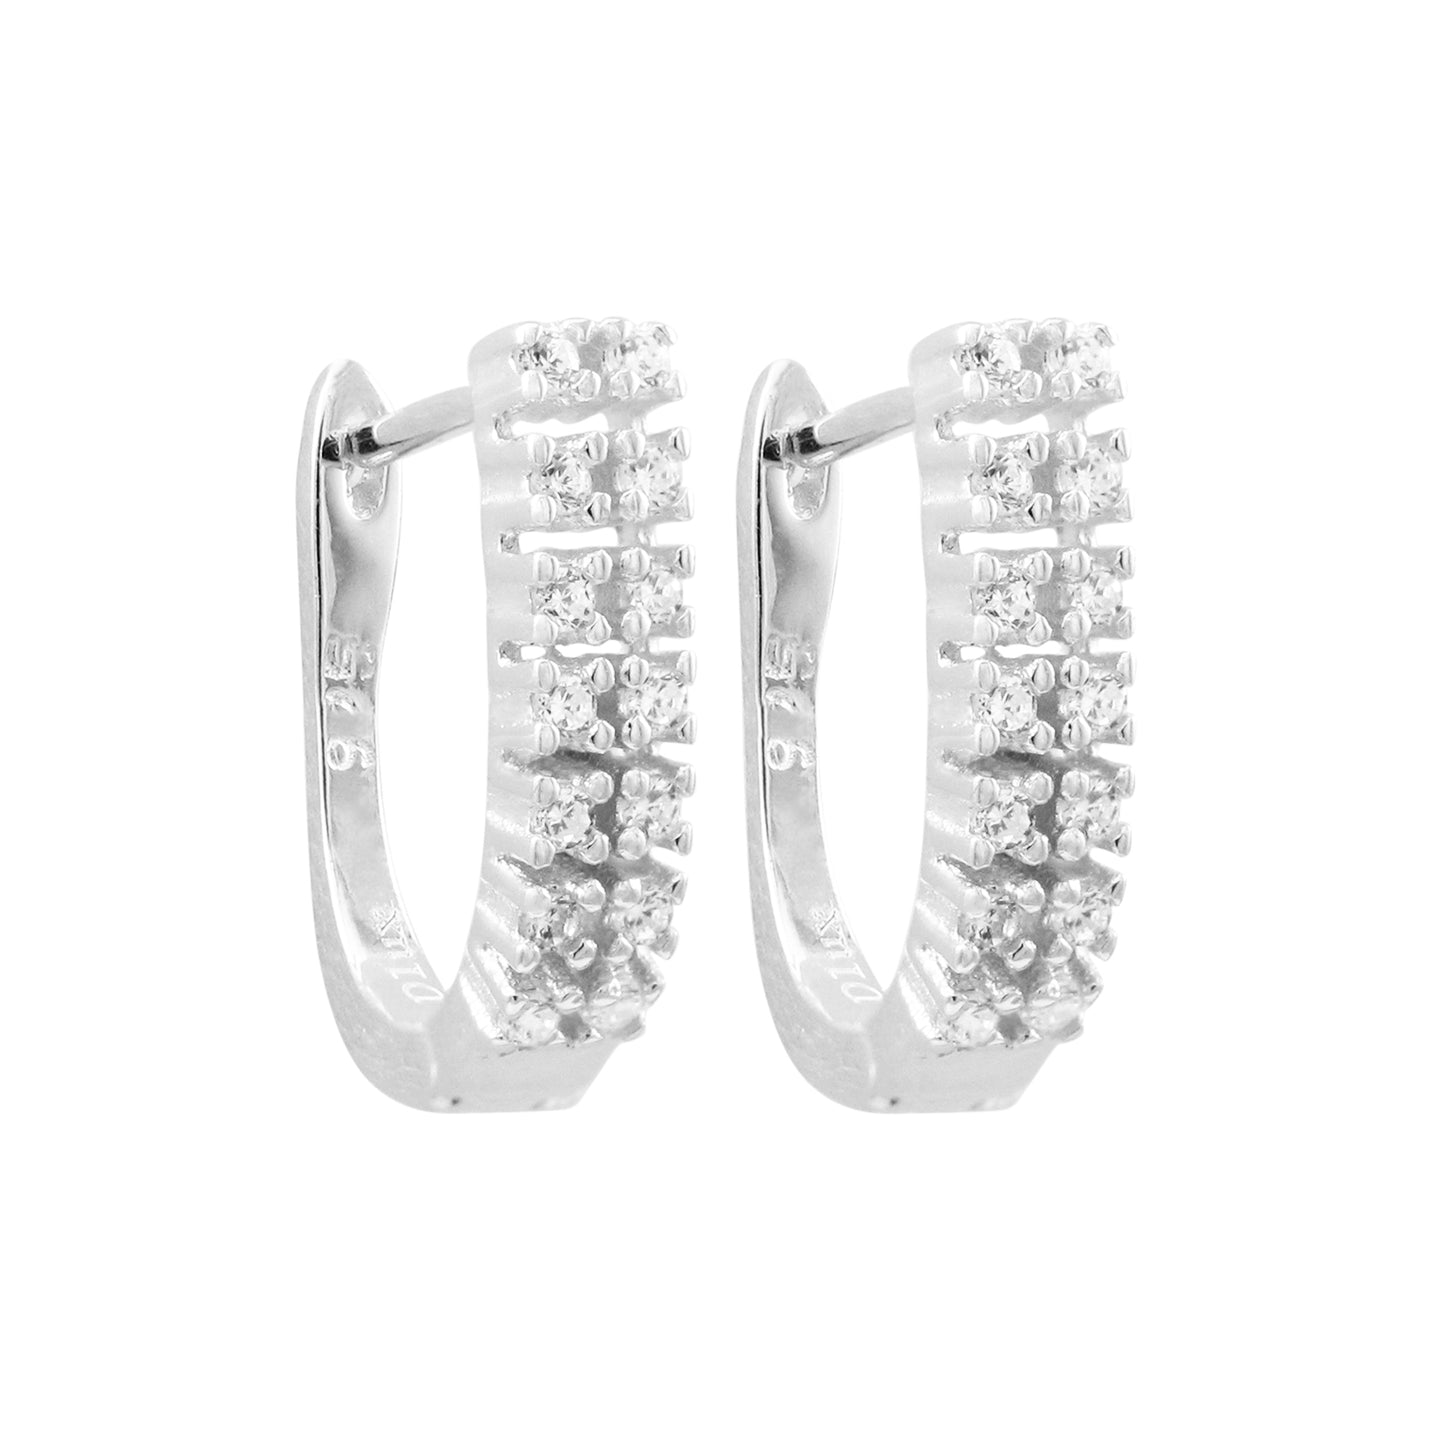 DK-925-139 sterling silver earrings with French lock